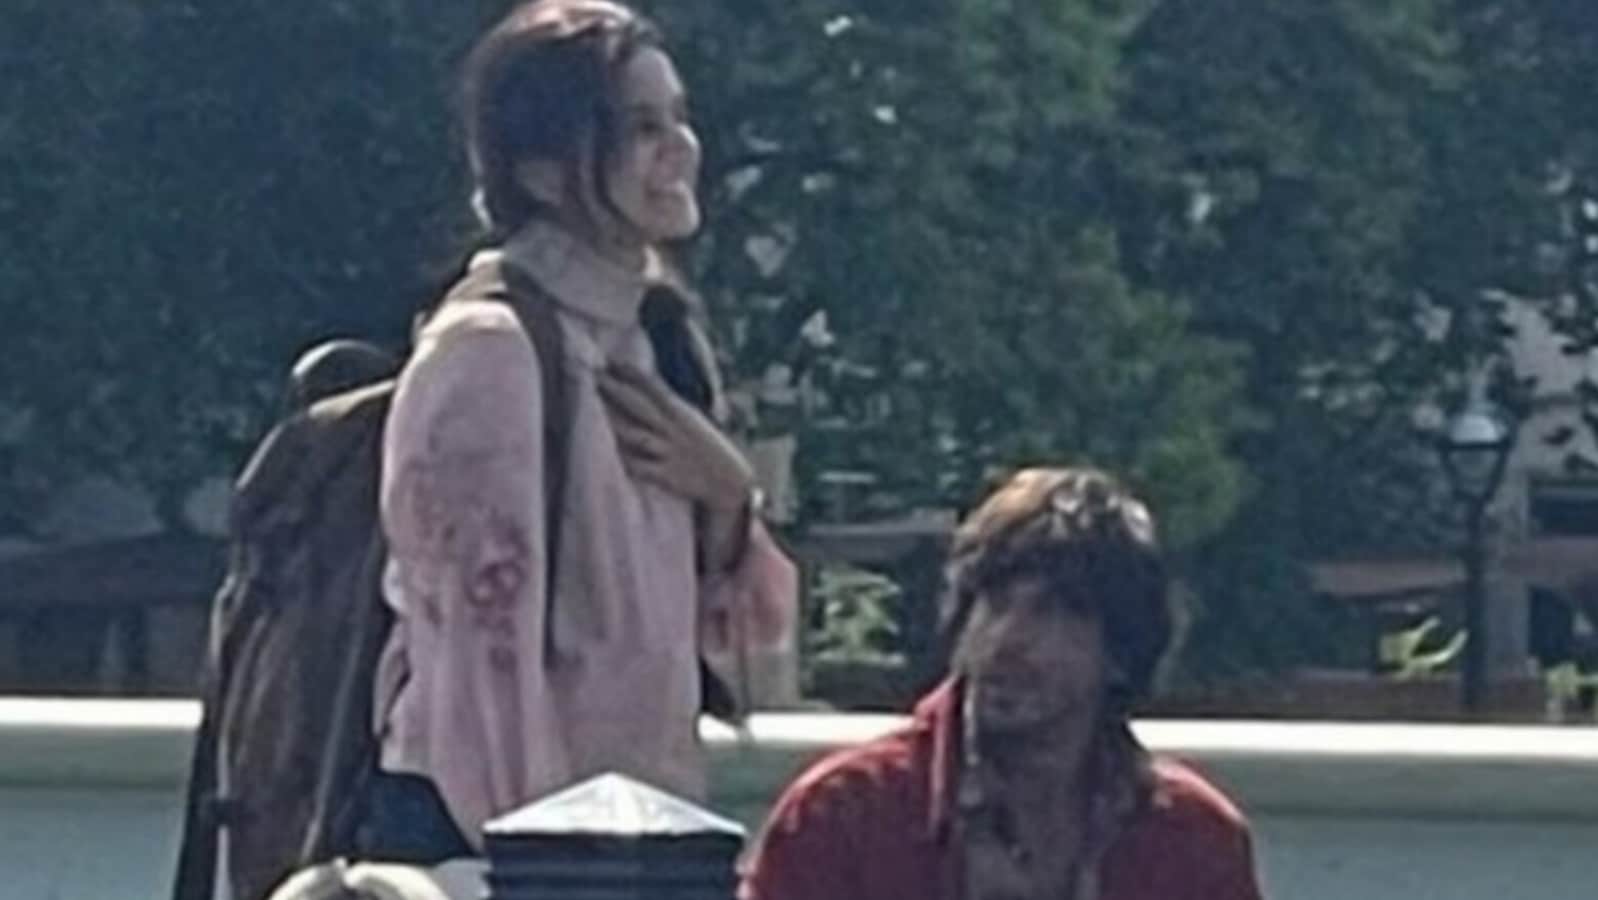 Shah Rukh Khan and Taapsee Pannu chat in London streets during Dunki shoot, her first look from film is leaked